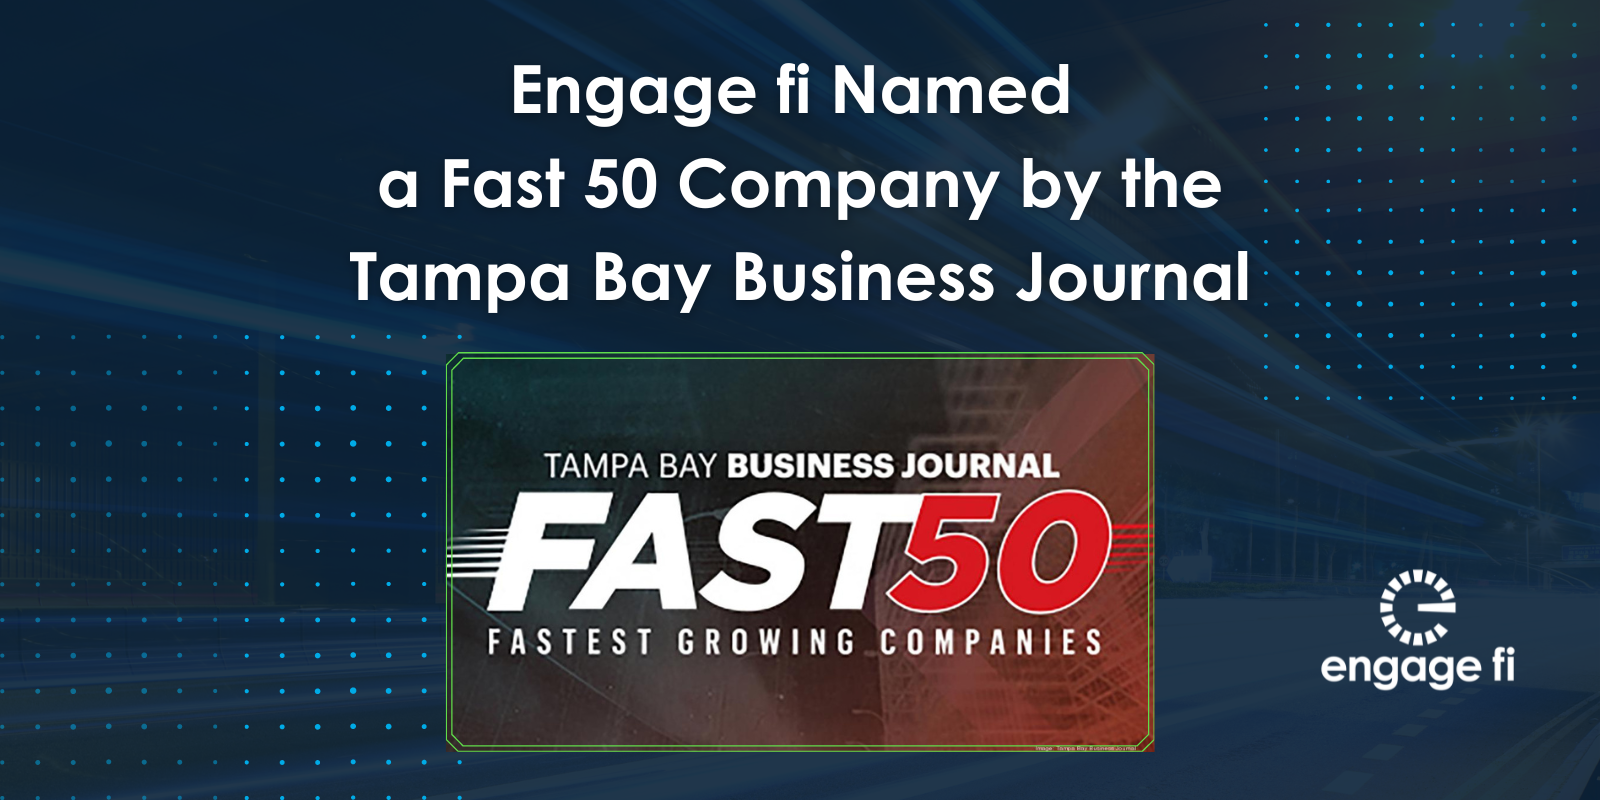 Engage fi Named Fast 50 Company in 2023 by the Tampa Bay Business Journal!